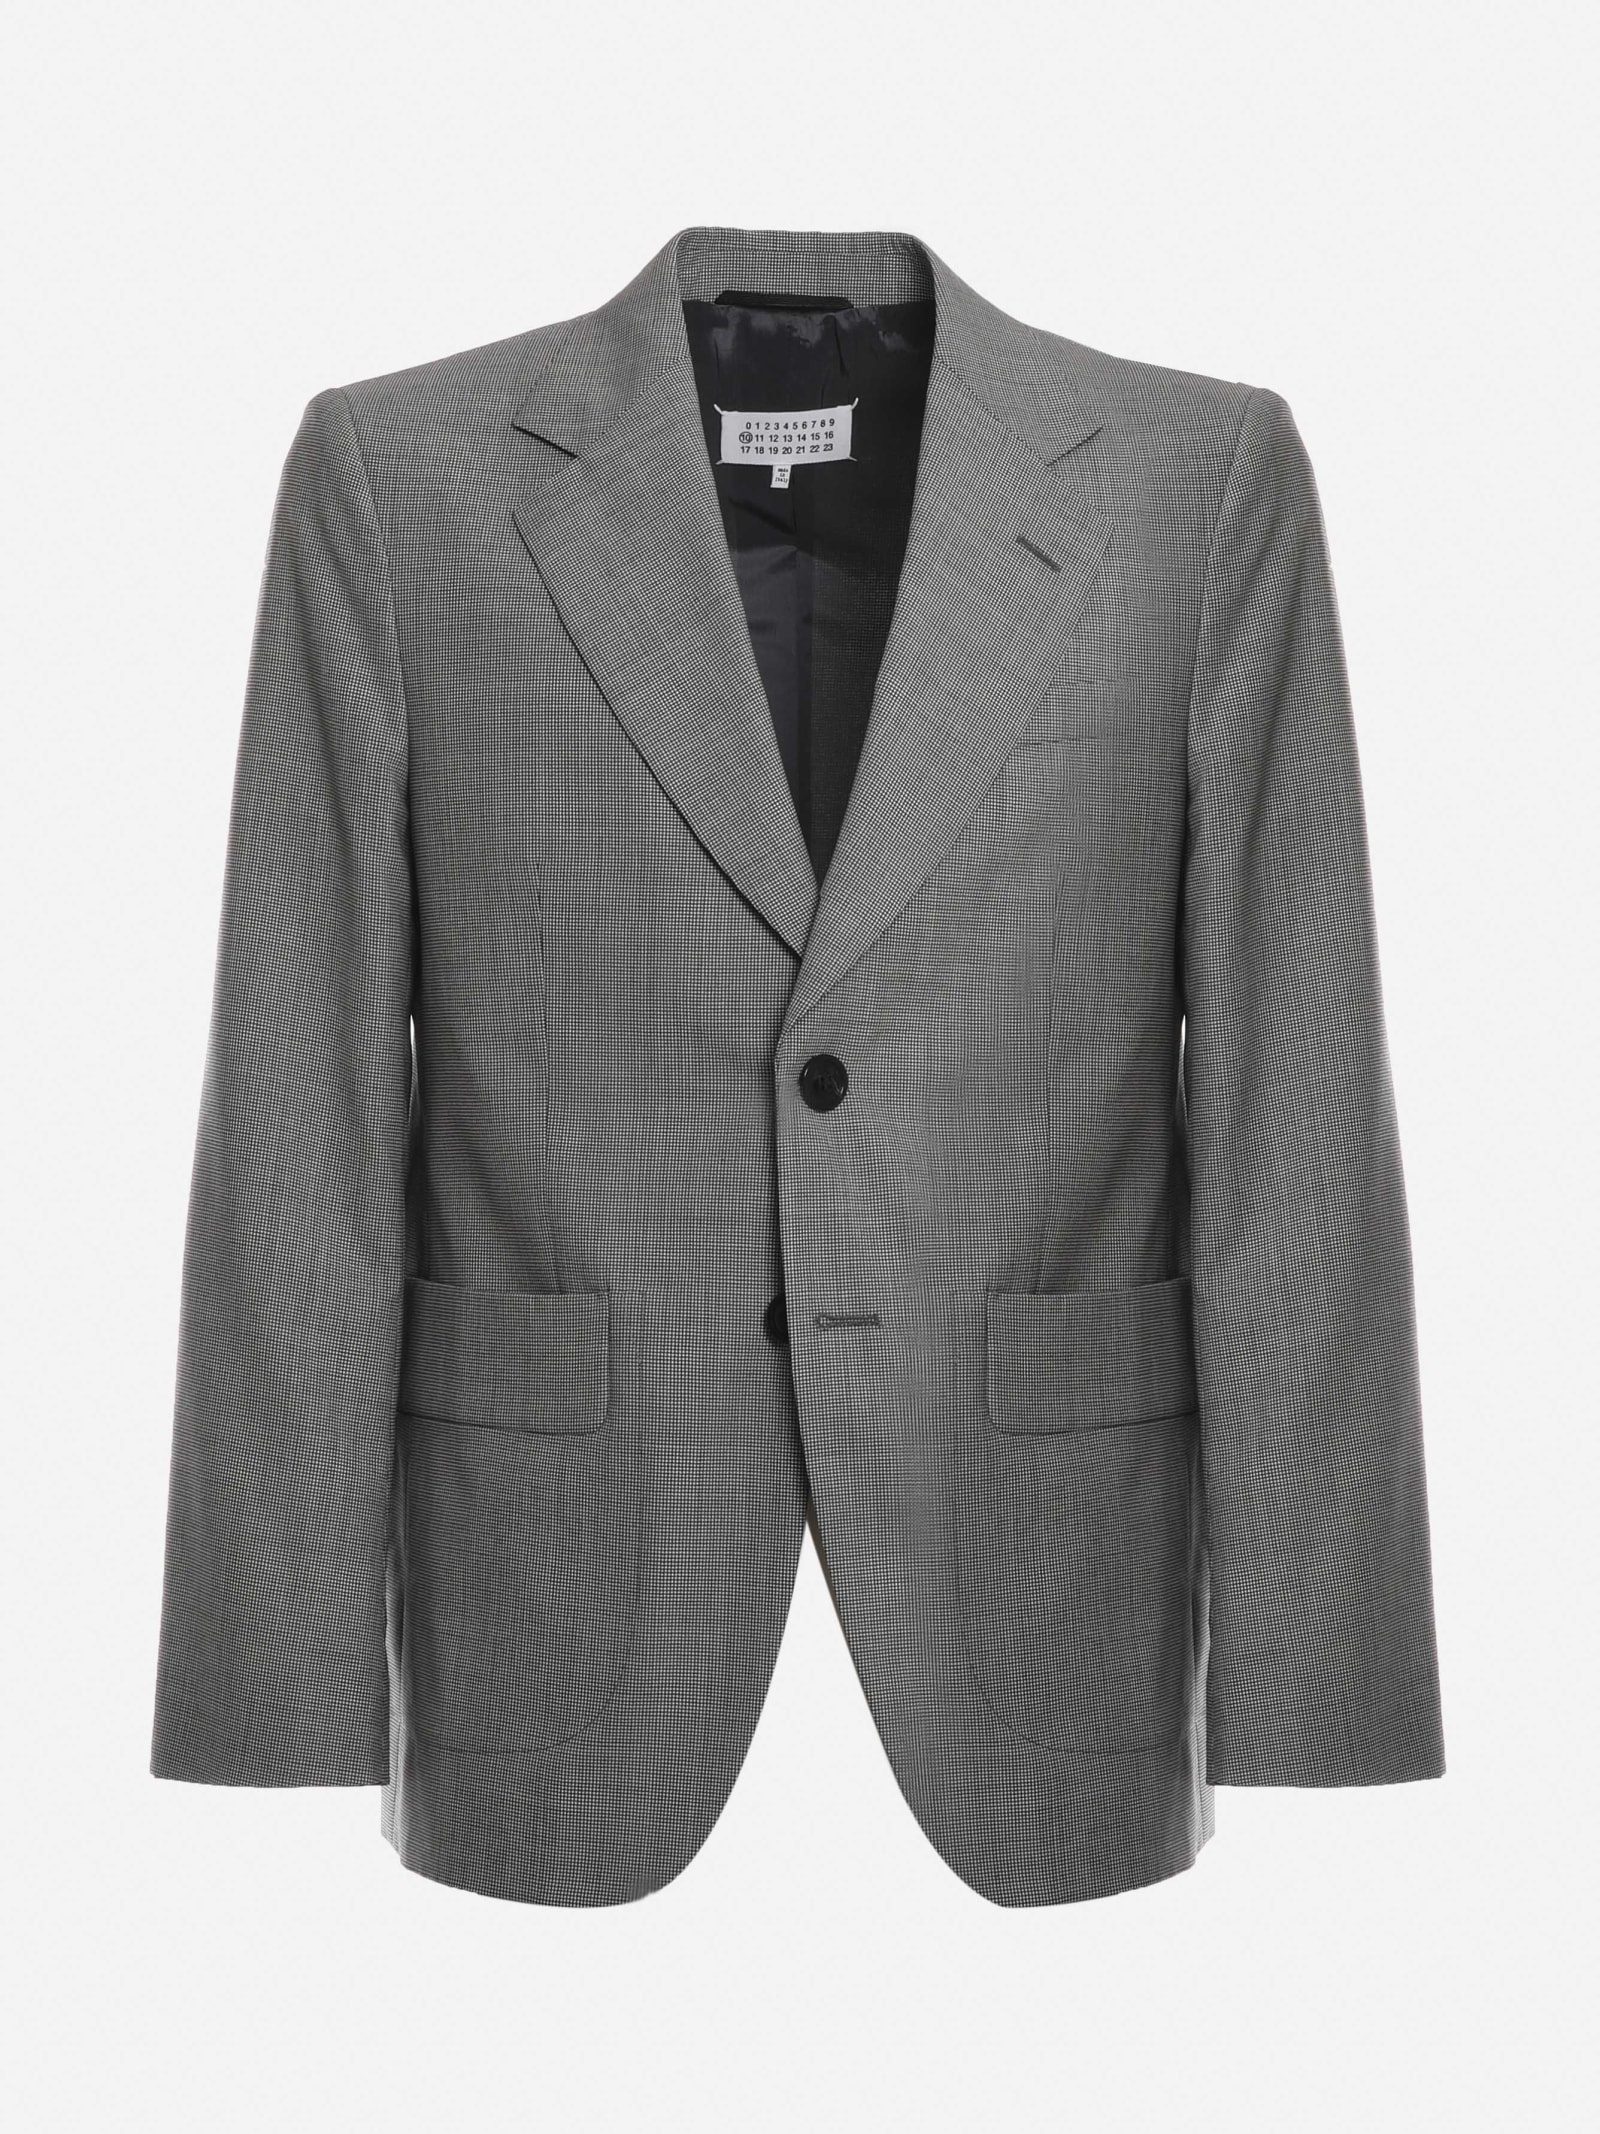 Maison Margiela Suit In Mini Houndstooth Made Of Wool In Black, White